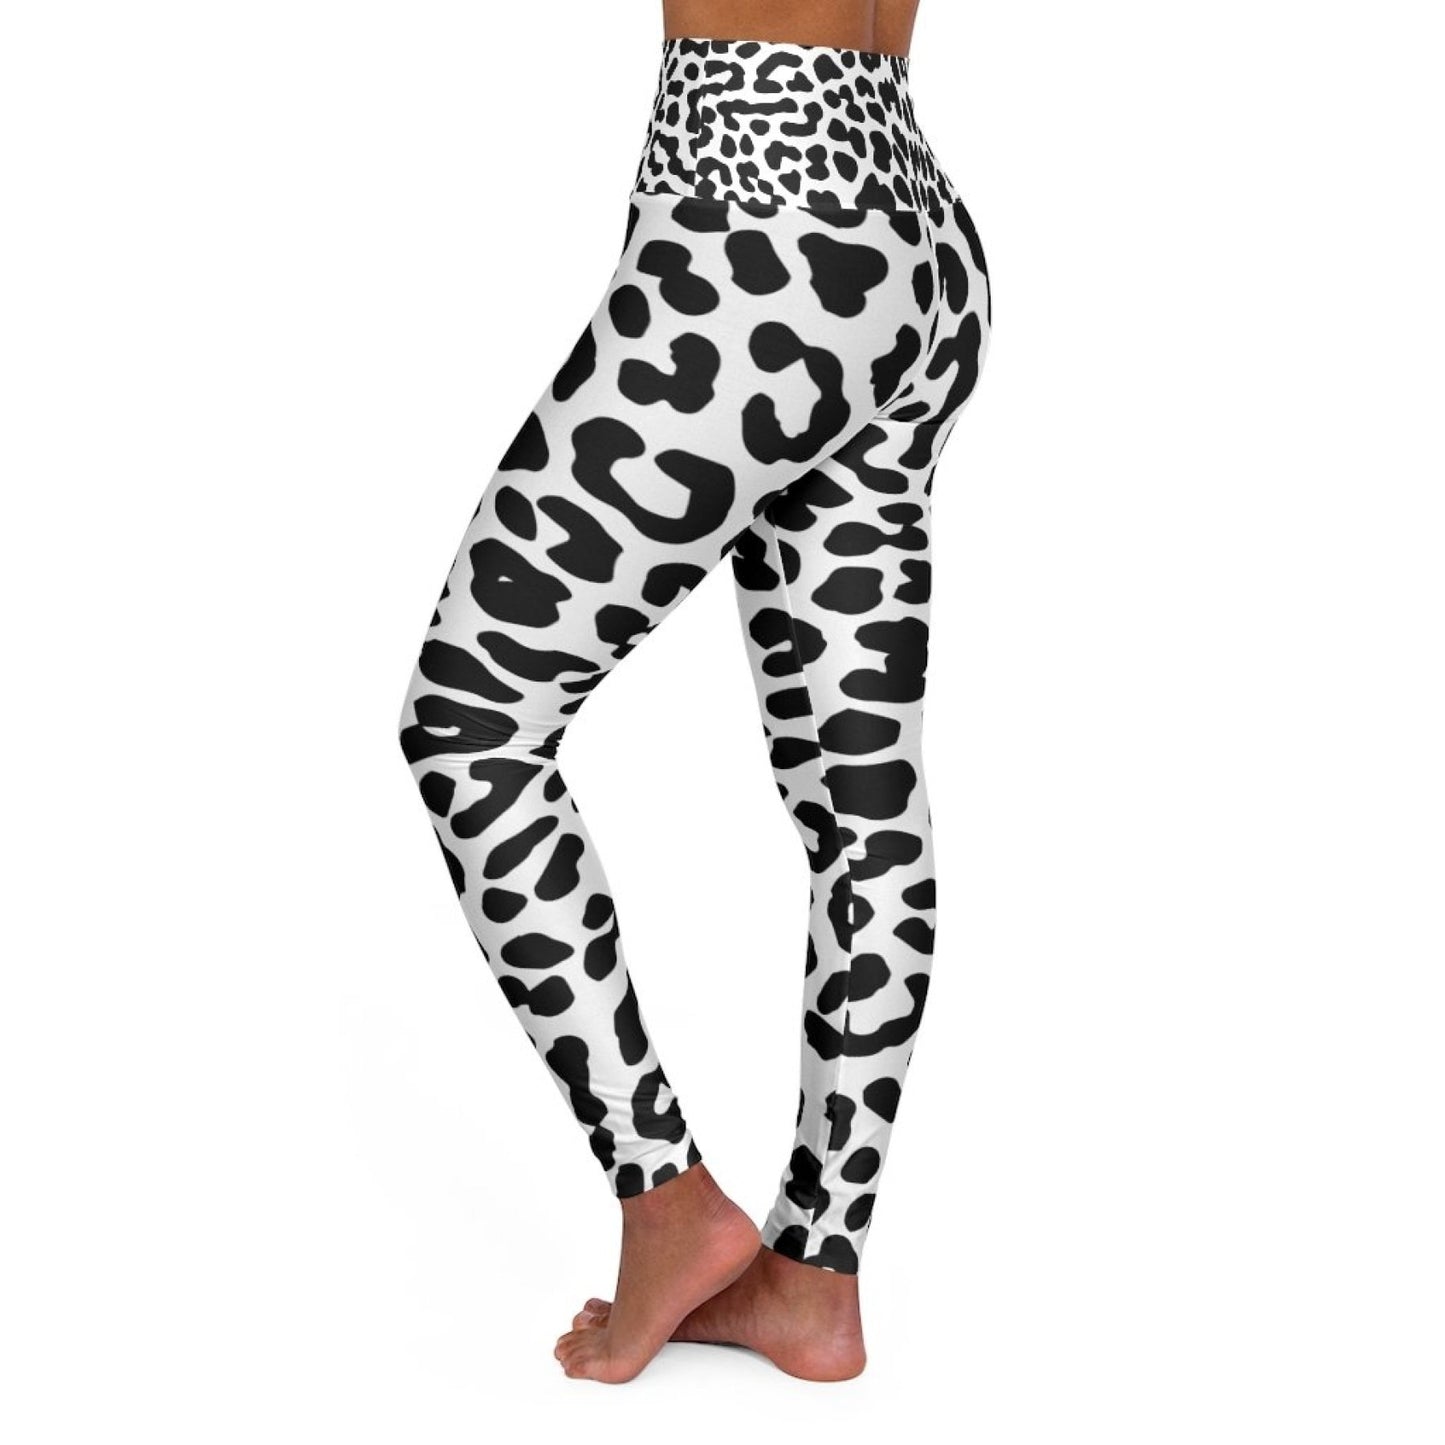 High Waisted Yoga Leggings, Black And White Leopard Style Pants